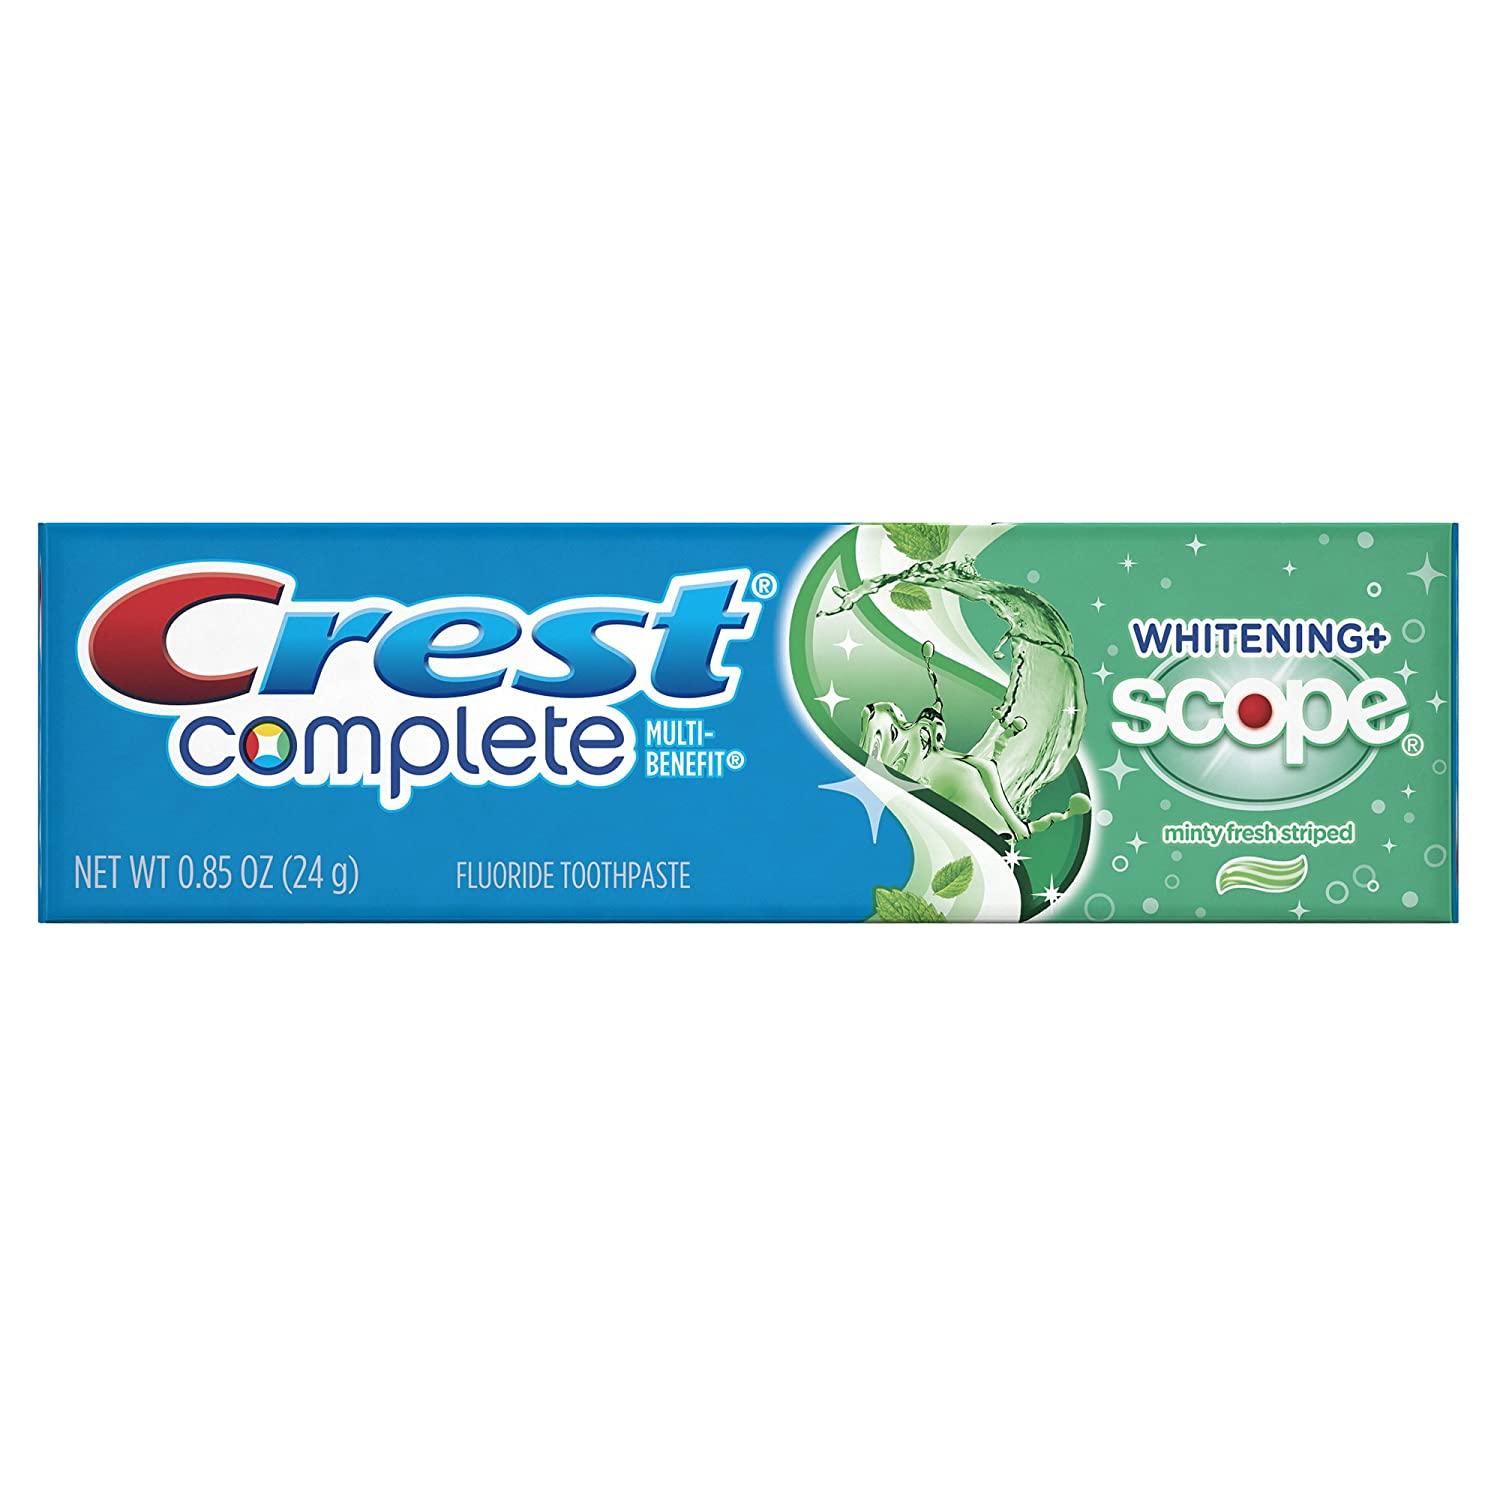 Crest Complete Whitening Plus Scope Minty Fresh Toothpaste, 0.85 Ounce